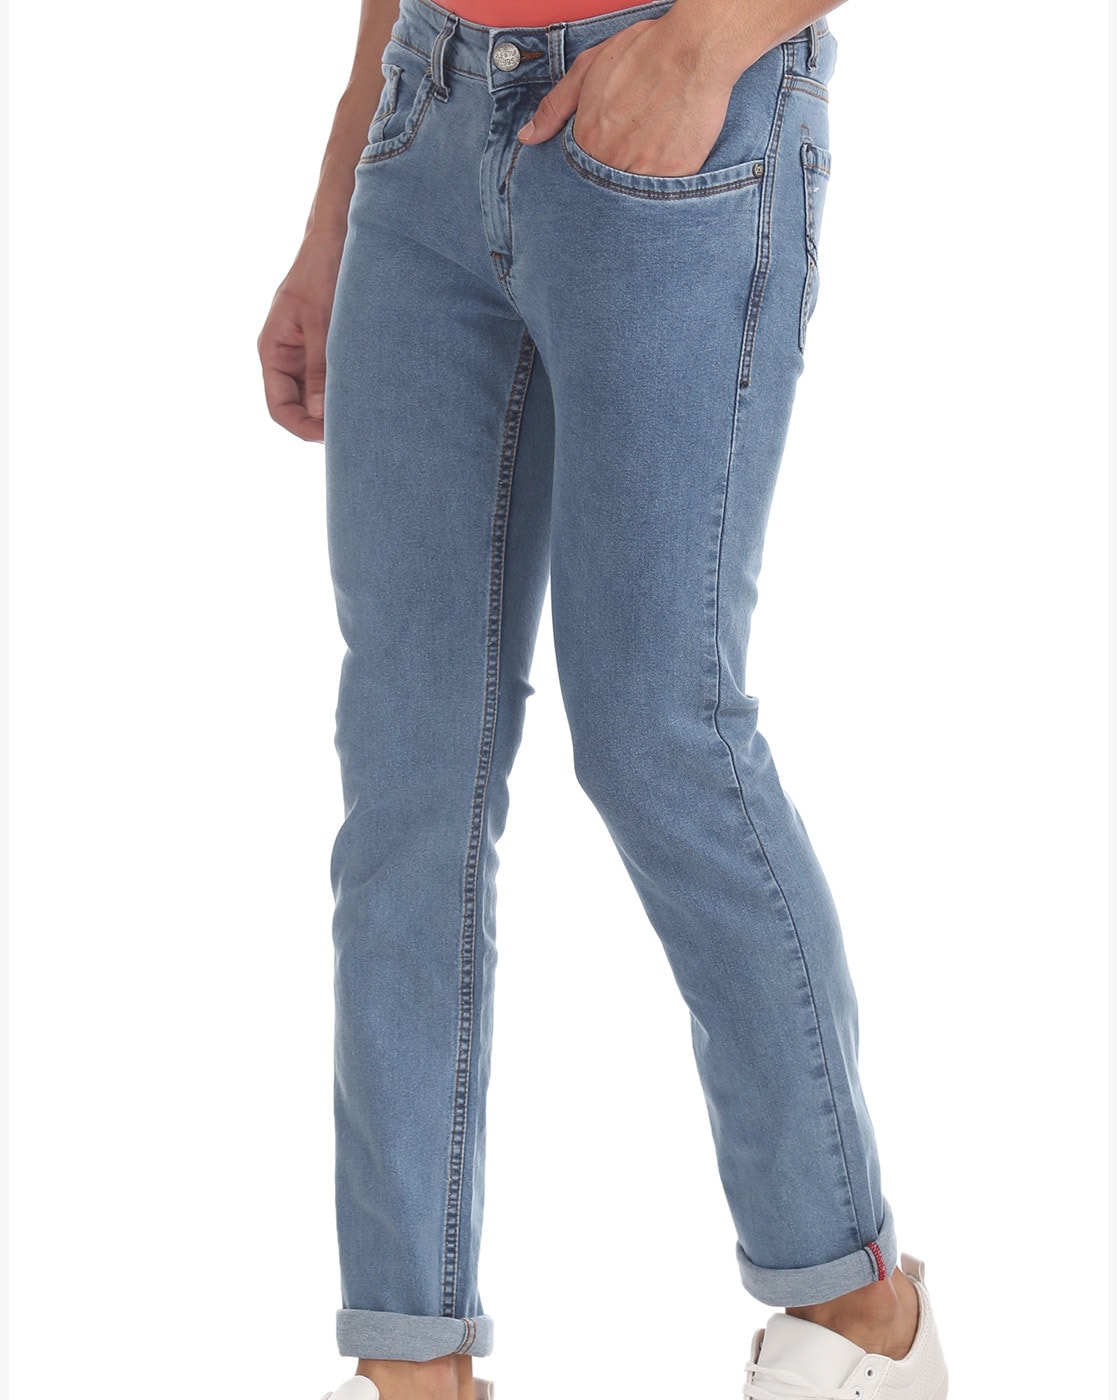 ruf and tuf jeans price